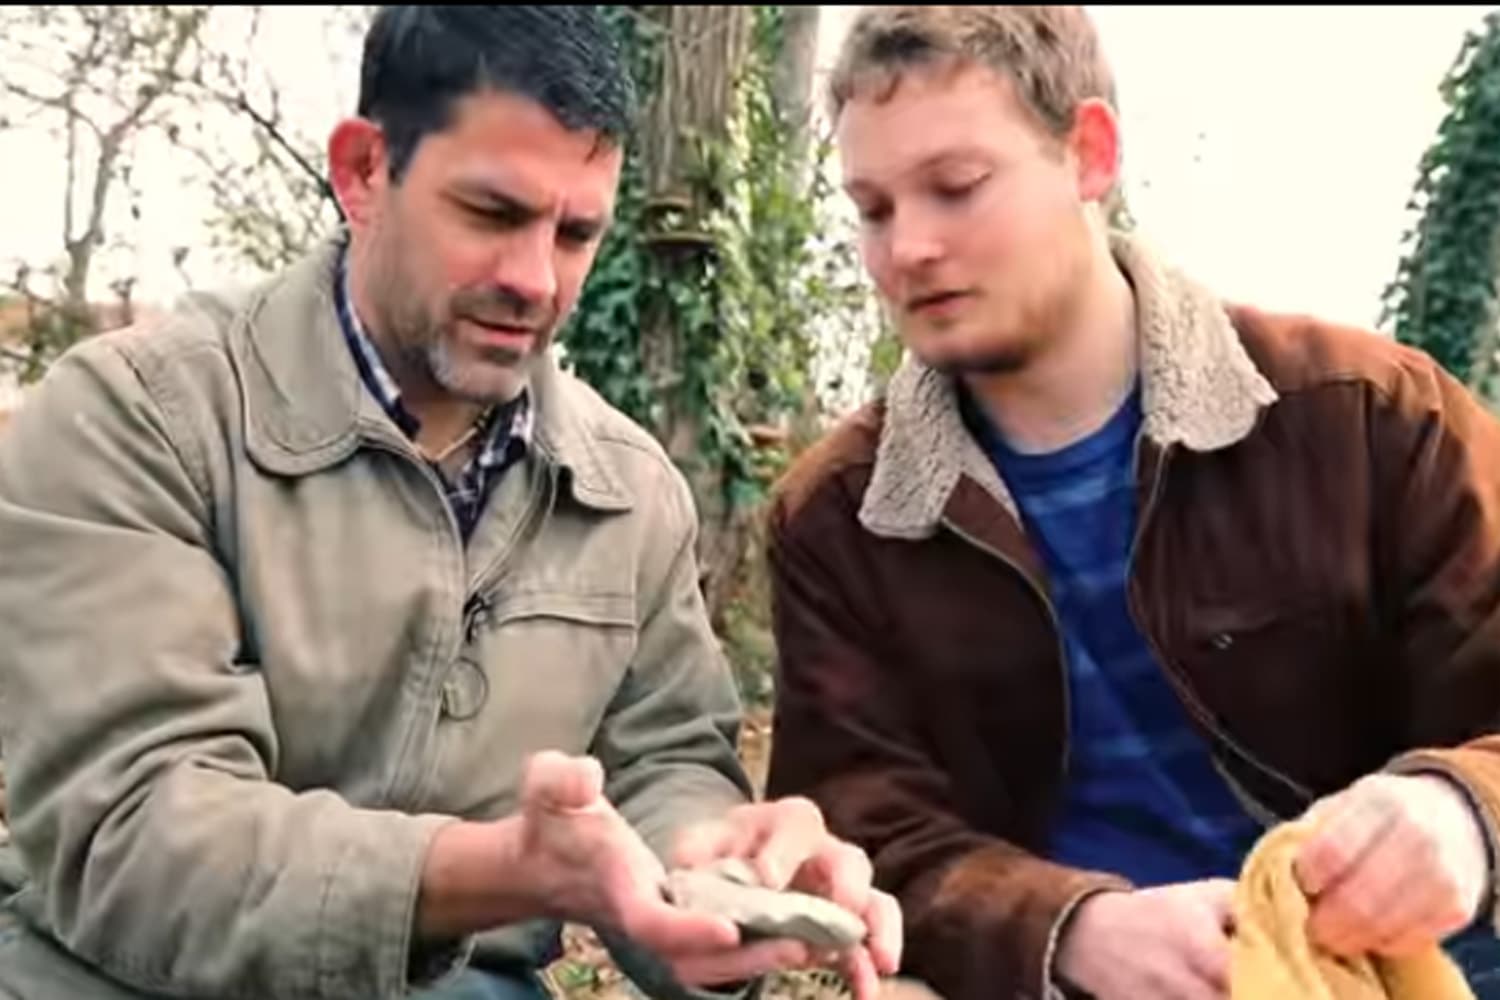 Bill Schindler, an associate professor of anthropology instructs former student Mike Whisenant, class of 2016, in primitive carving techniques in a still from a video filmed at Washington College. (Courtesy Washington College)